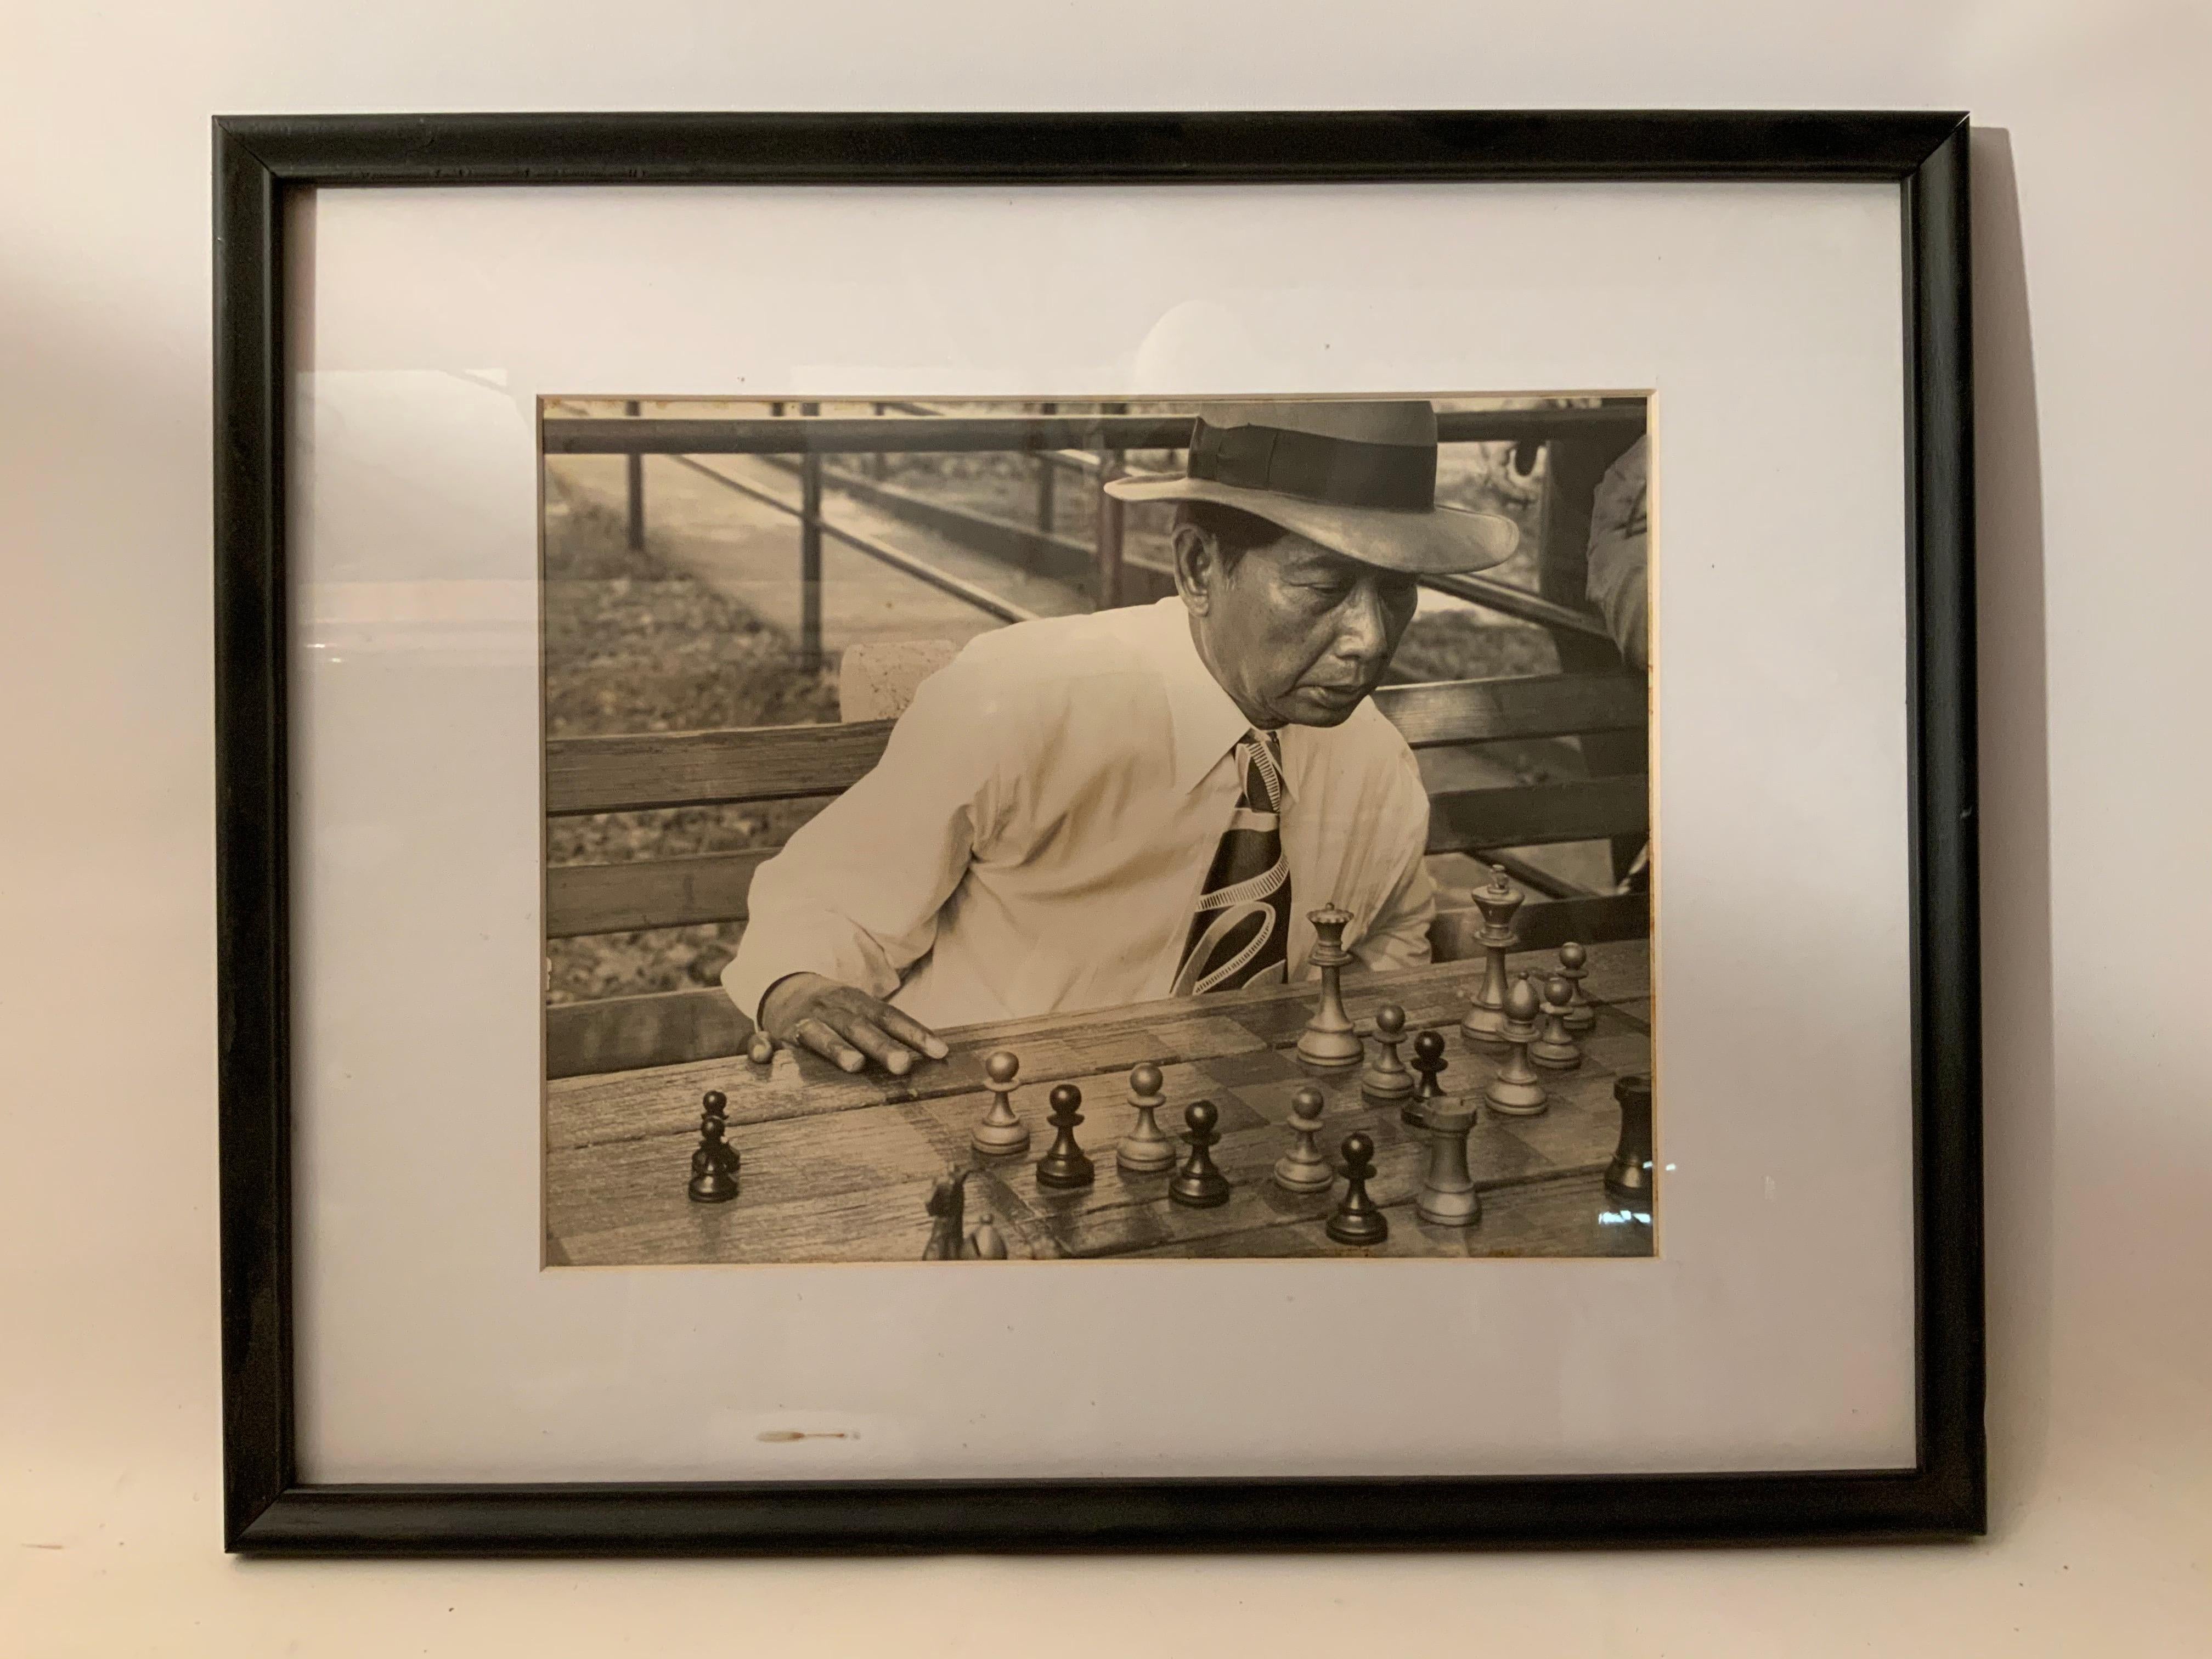 Excellent image and composition in black and white photography of a chess player taken in Mexico City, circa 1950. Framed, glazed and matted. The photo was taken by architect, teacher, and amateur designer and photographer, Raymond Groce. Groce and